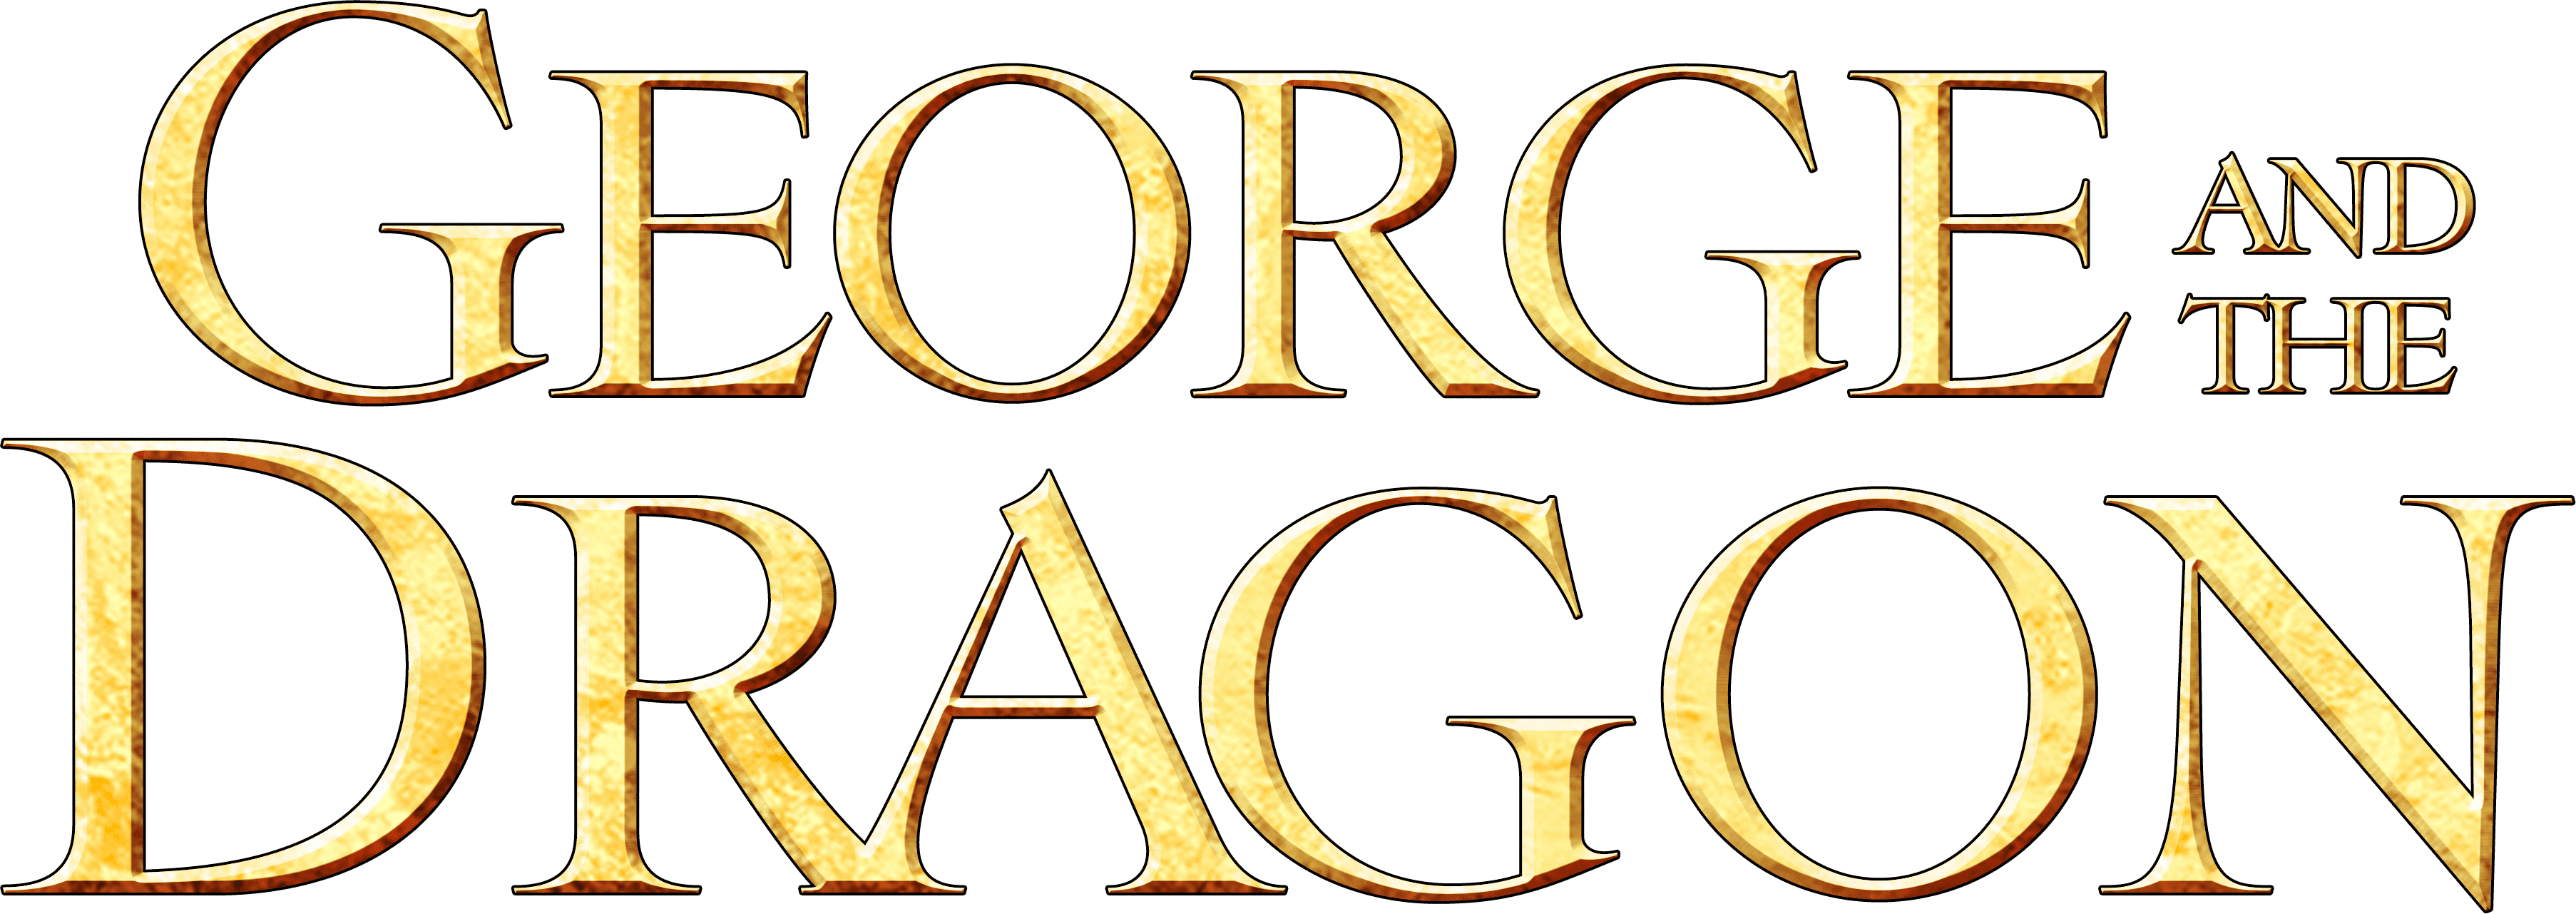 George and the Dragon logo